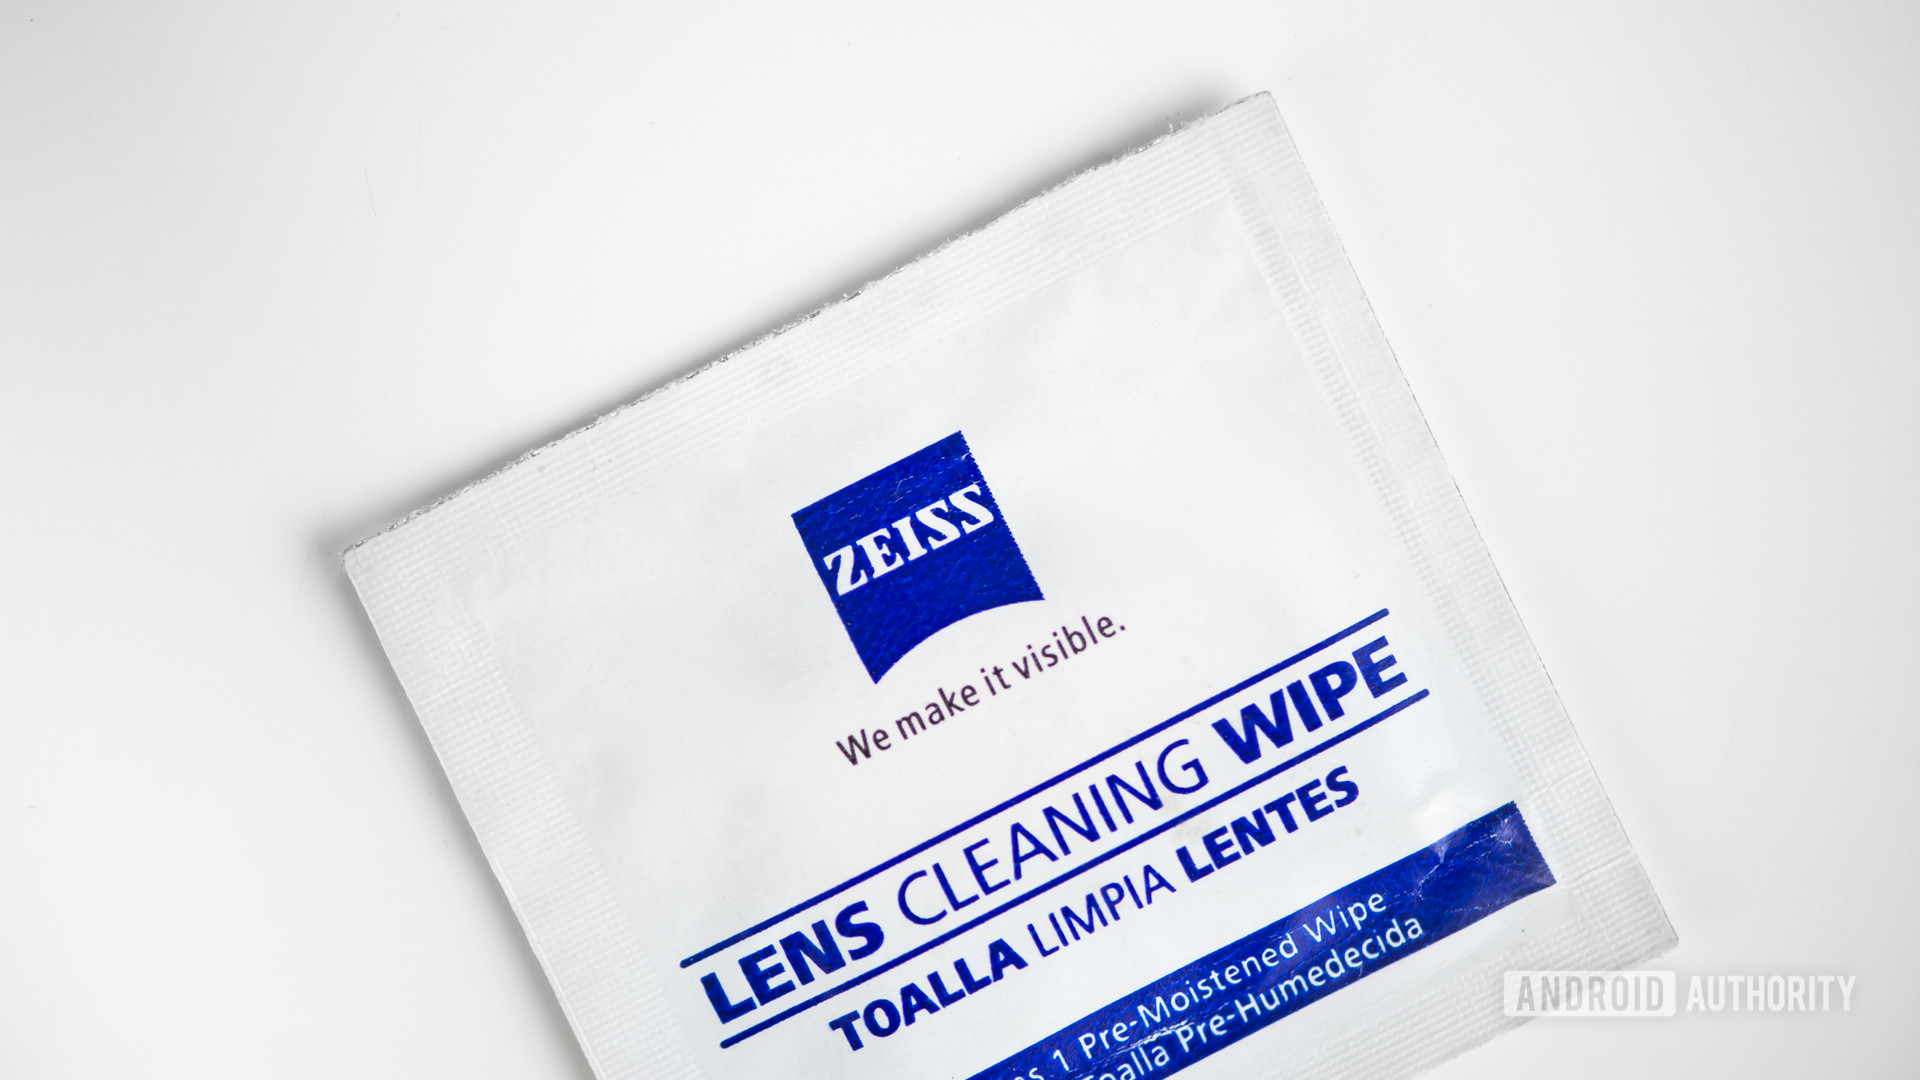 Zeiss lens cleaning wipe stock photo